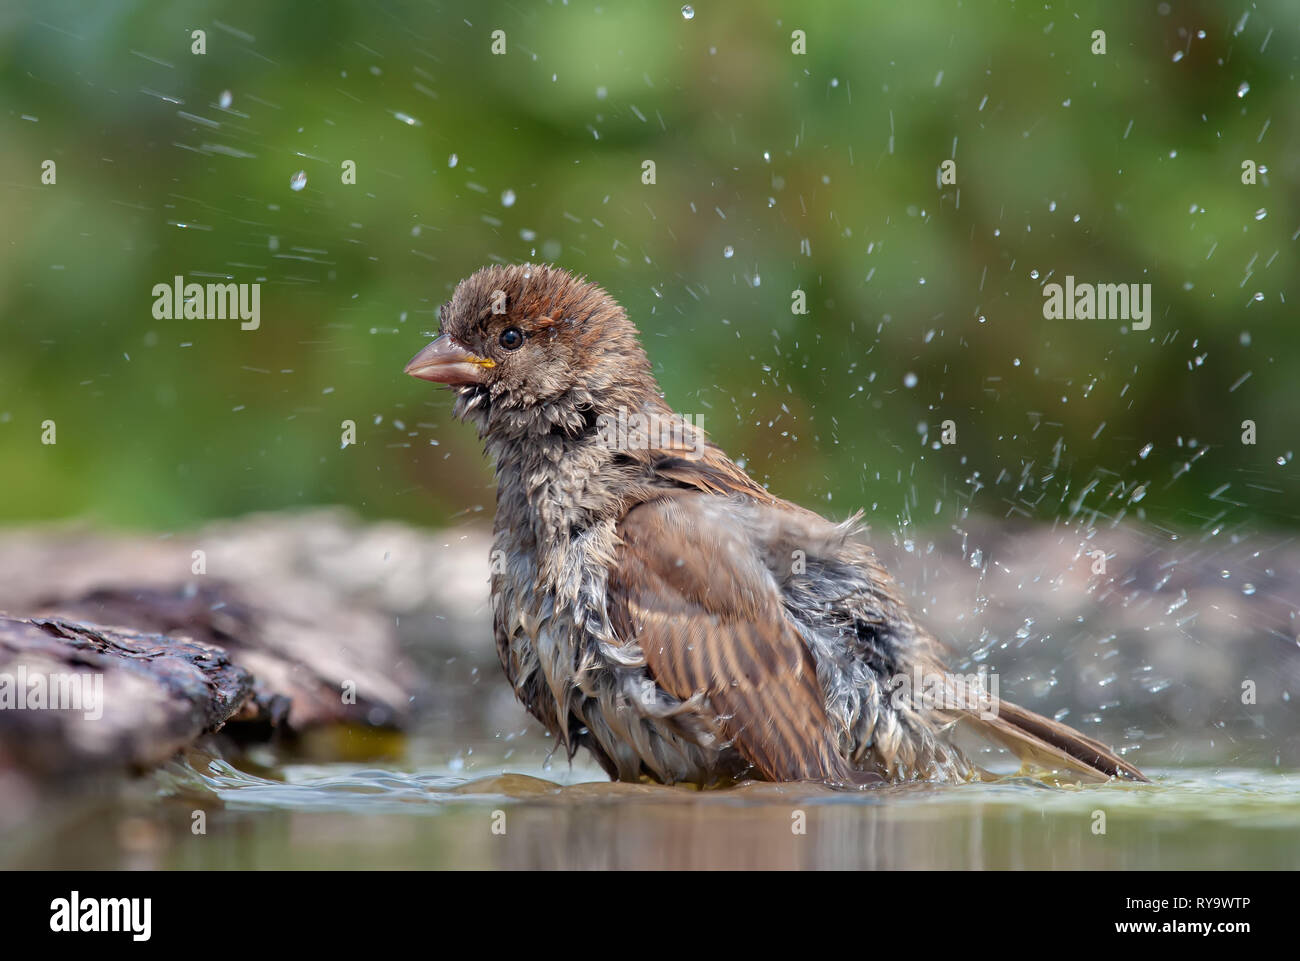 House sparrow bathing with splashes in water pond Stock Photo